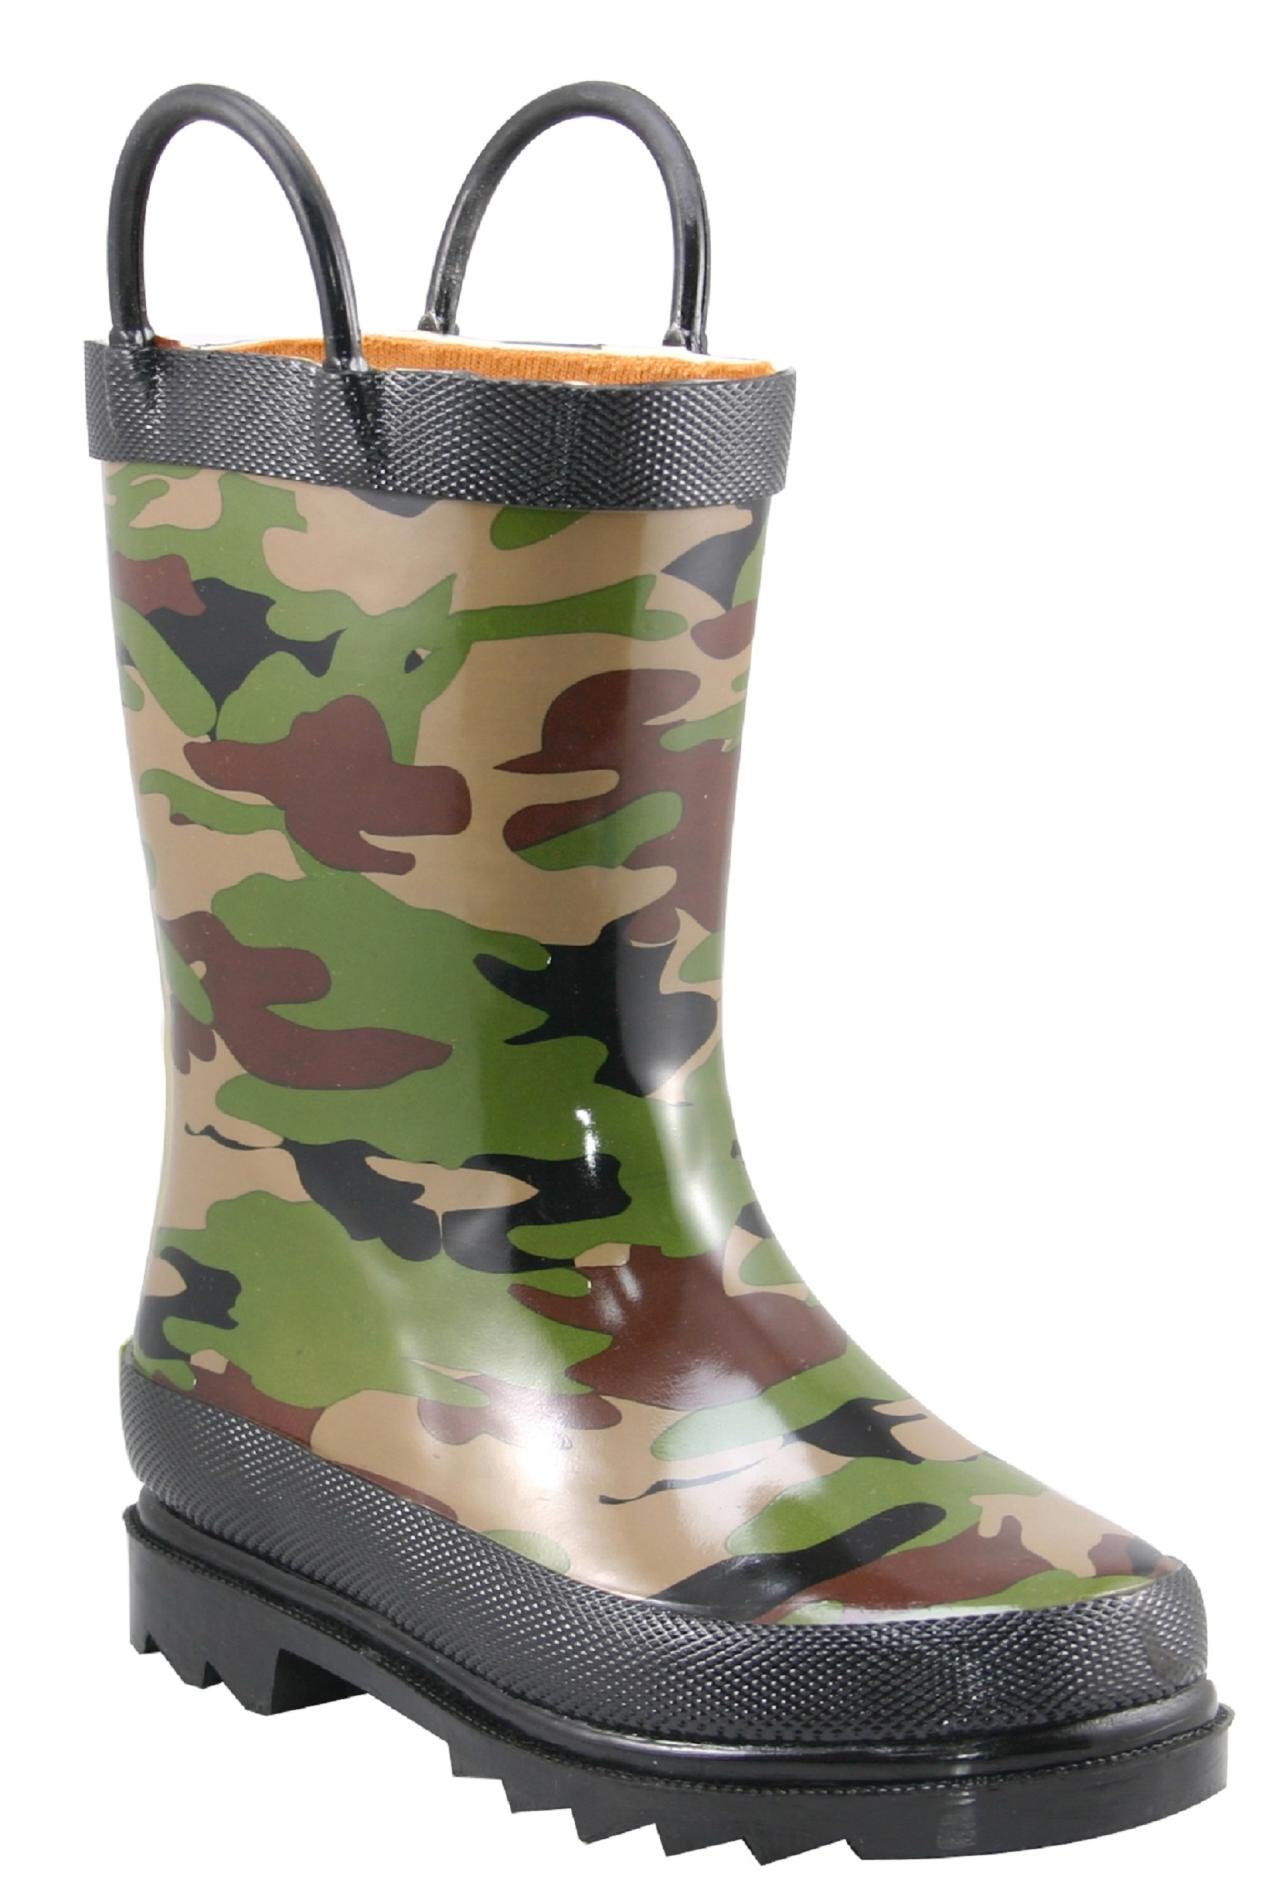 Western Chief Toddler Boy's Green/Camouflage Rain Boot